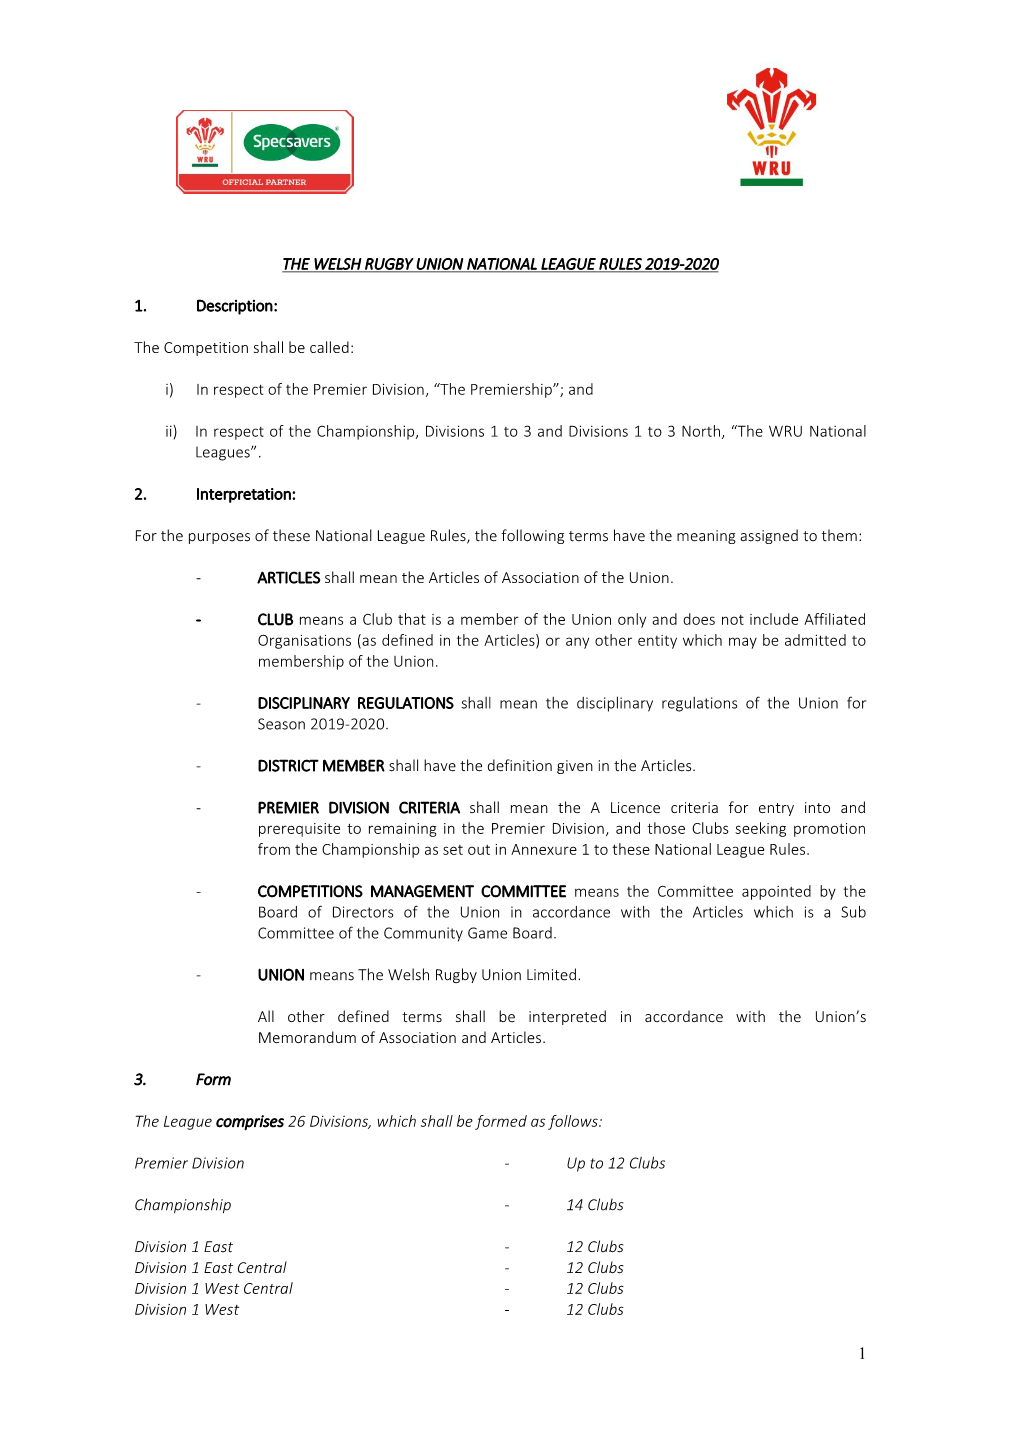 1 the Welsh Rugby Union National League Rules 2019